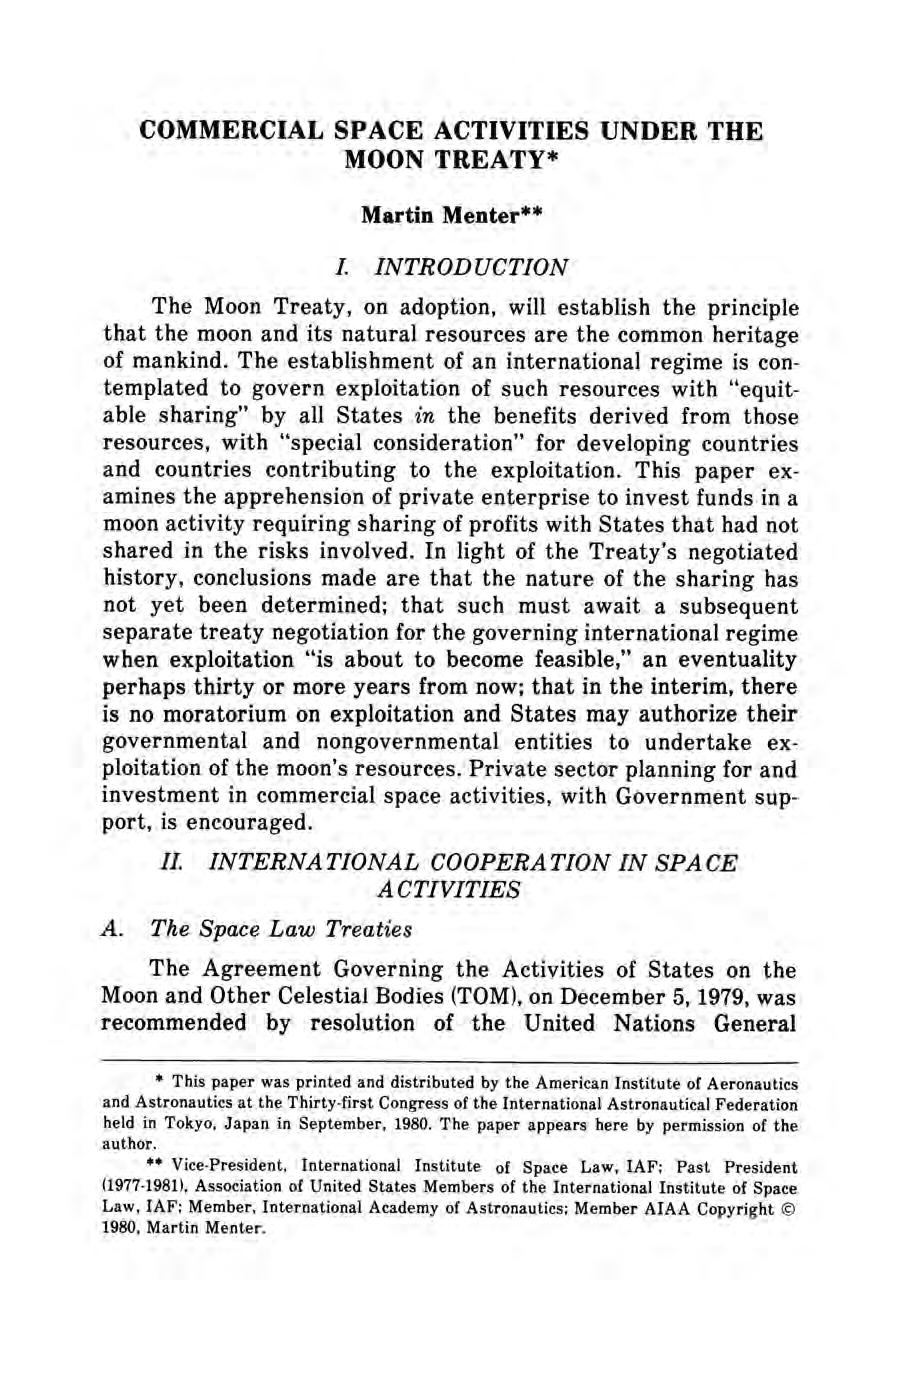 Menter: Commercial Space Activities COMMERCIAL SPACE ACTIVITIES UNDER THE MOON TREATY* Martin Menter** L INTRODUCTION The Moon Treaty, on adoption, will establish the principle that the moon and its